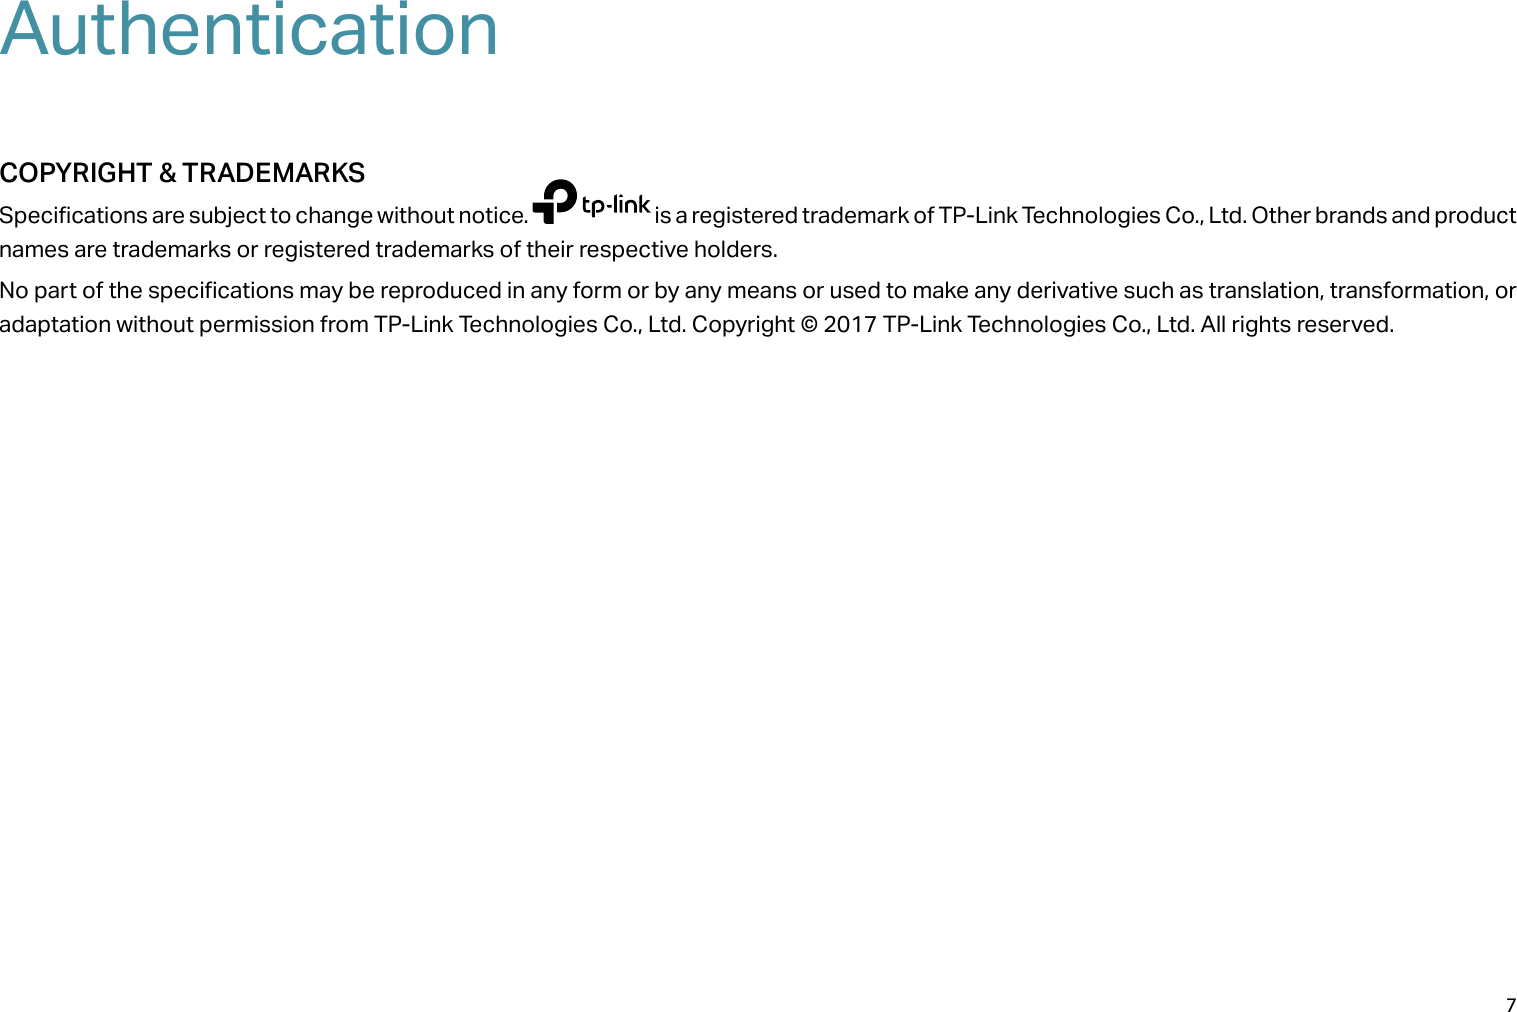 7AuthenticationCOPYRIGHT &amp; TRADEMARKSSpecifications are subject to change without notice.   is a registered trademark of TP-Link Technologies Co., Ltd. Other brands and product names are trademarks or registered trademarks of their respective holders.No part of the specifications may be reproduced in any form or by any means or used to make any derivative such as translation, transformation, or adaptation without permission from TP-Link Technologies Co., Ltd. Copyright © 2017 TP-Link Technologies Co., Ltd. All rights reserved.